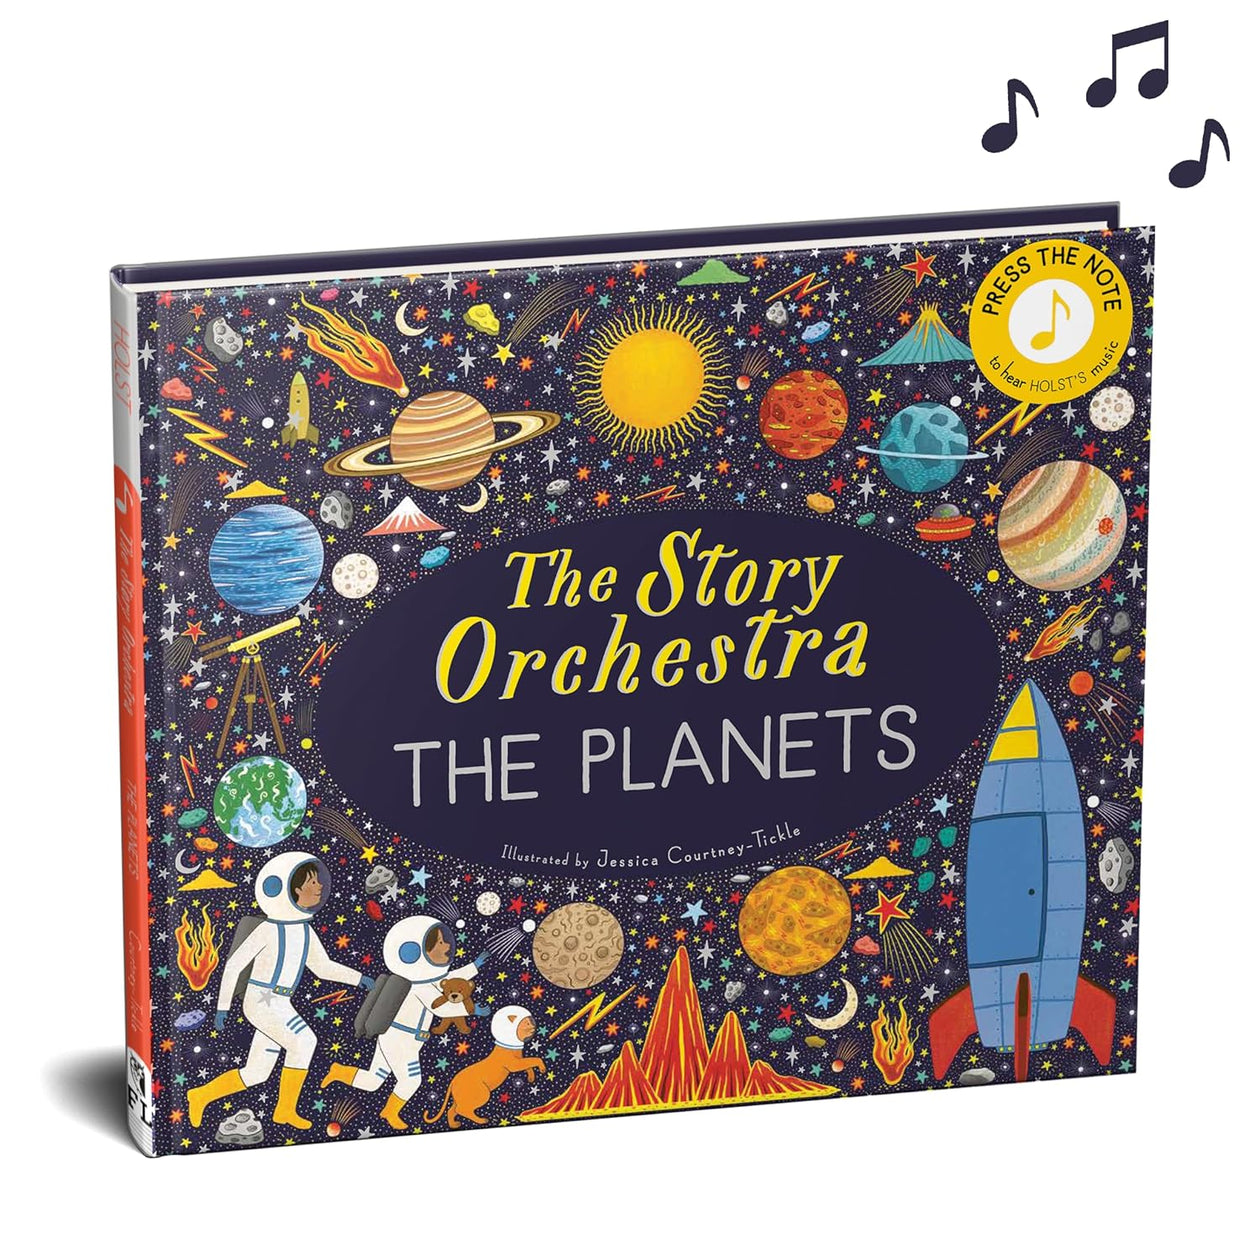 Helen Mortimer: The Planets, illustrated by Jessica Courtney-Tickle